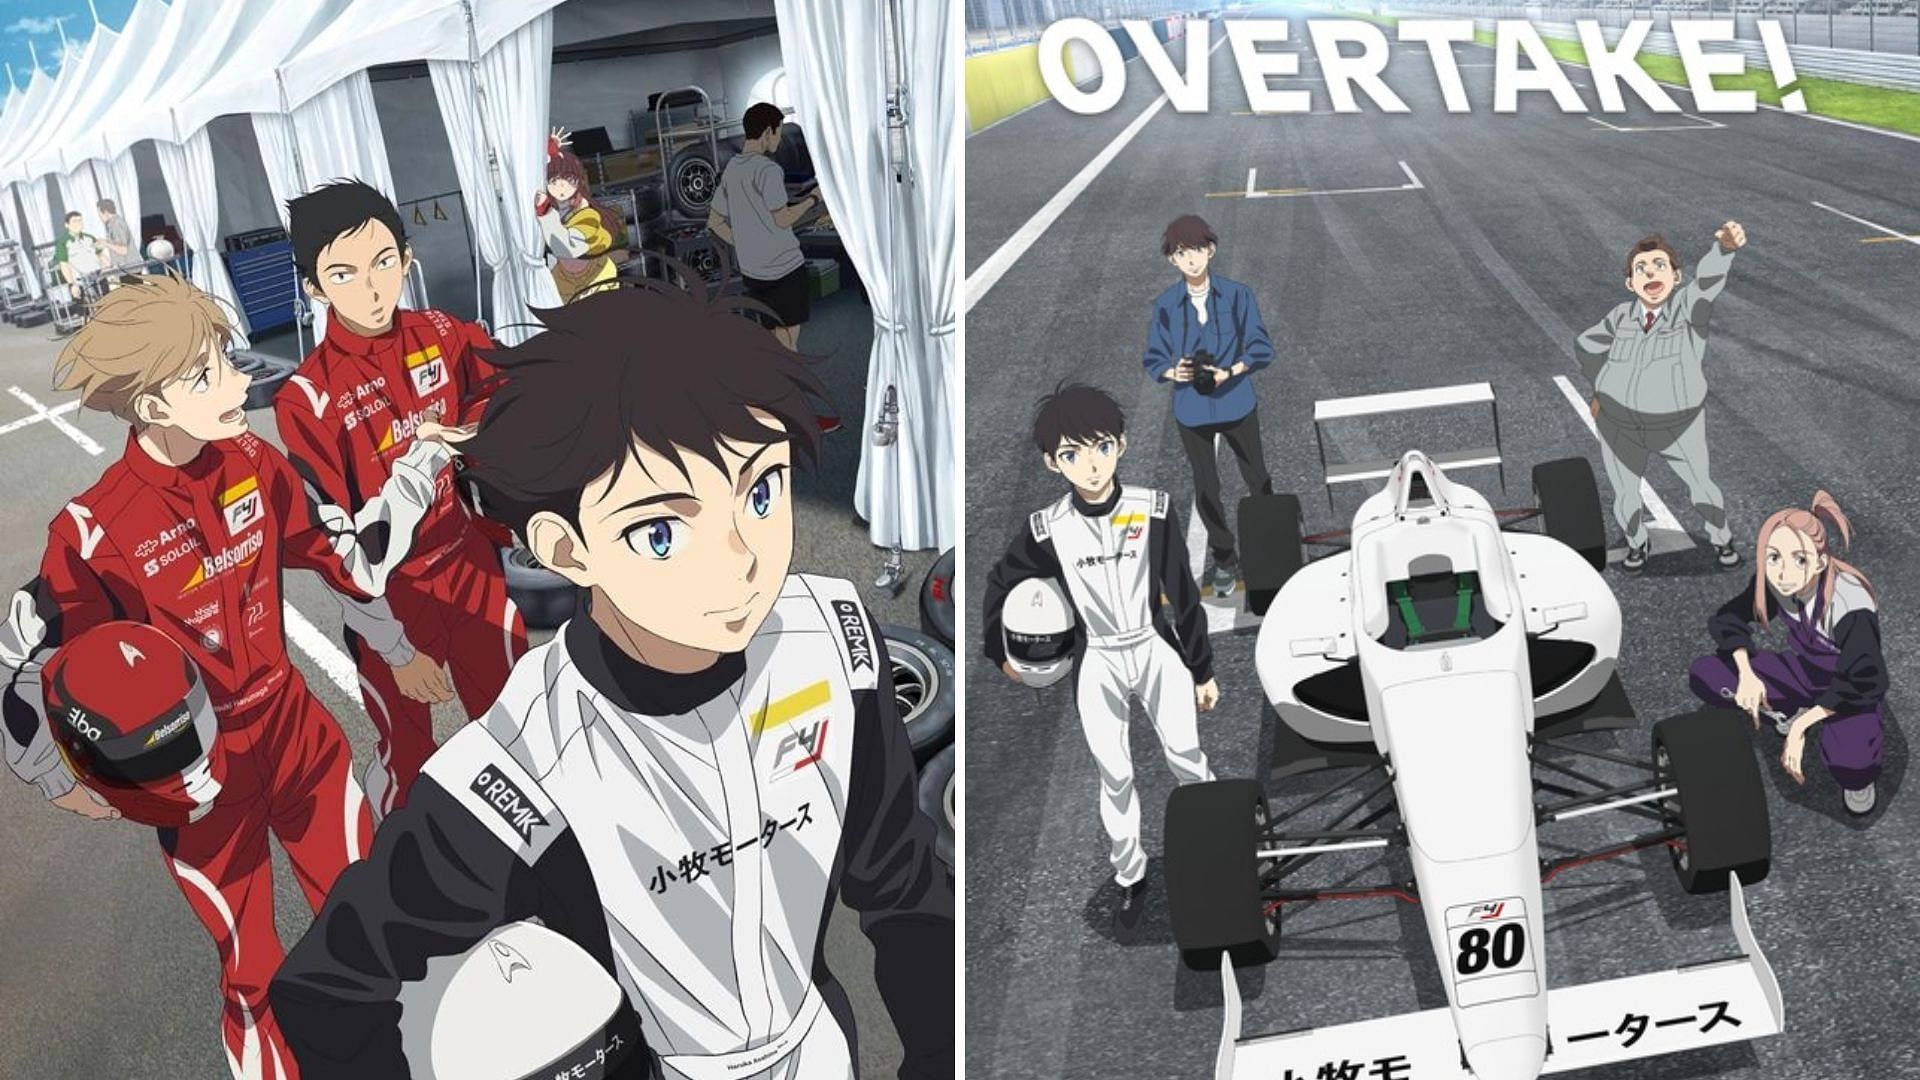 Anime-style race car drivers in intense rivalry on Craiyon